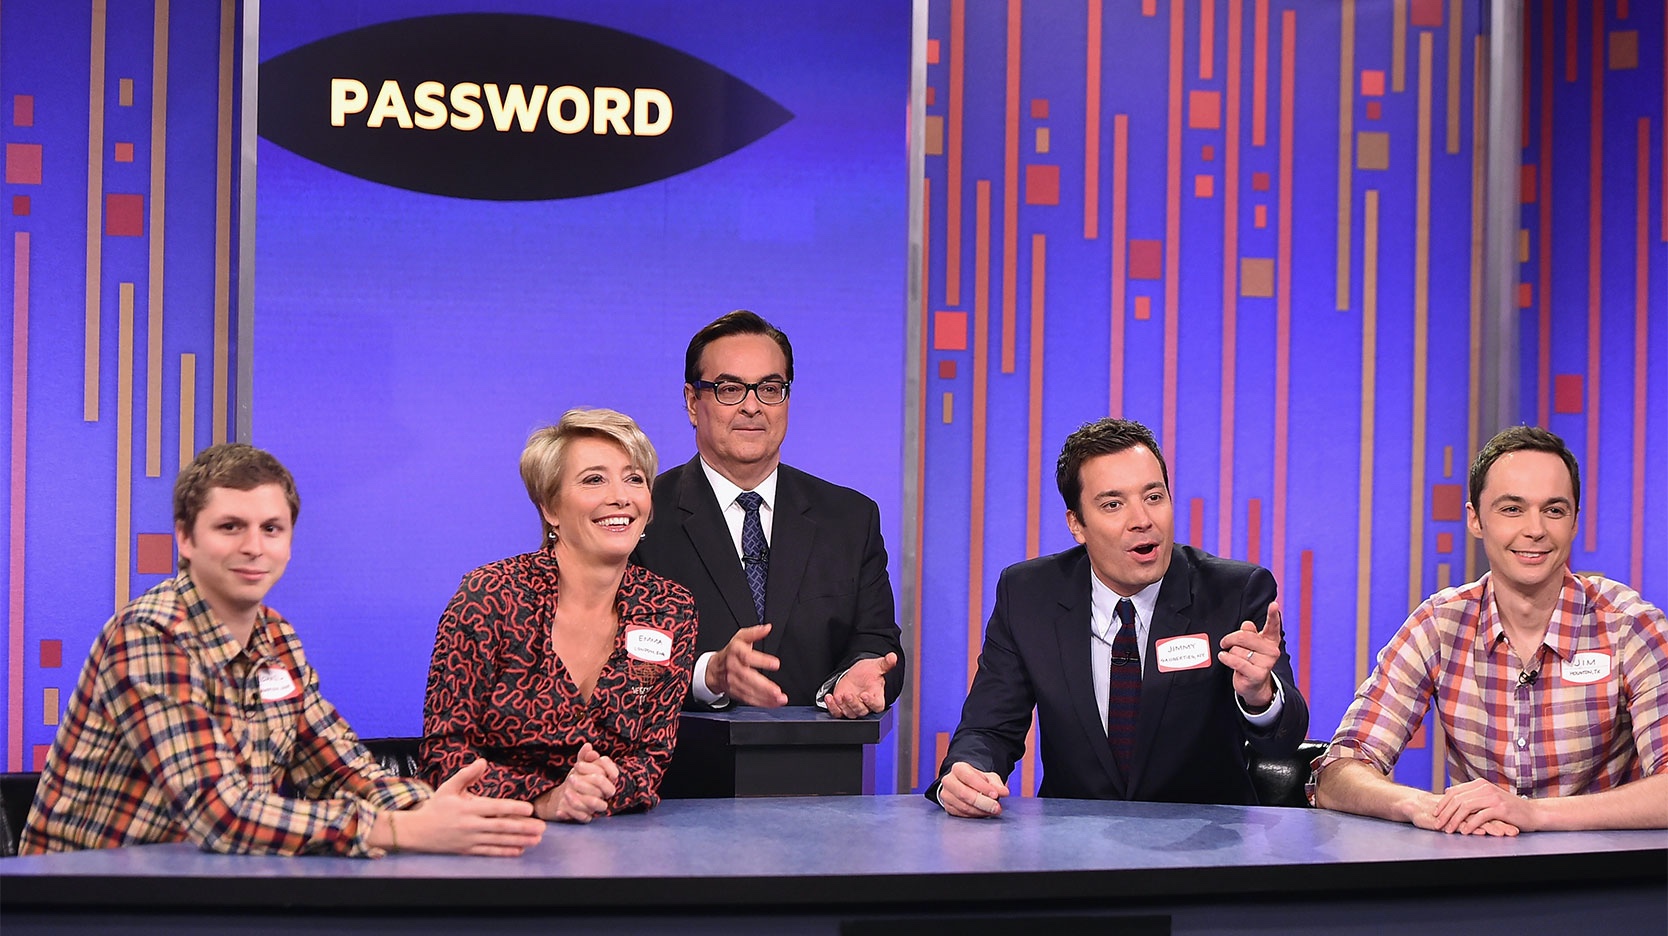 The Password Game Show Secrets of Its Success